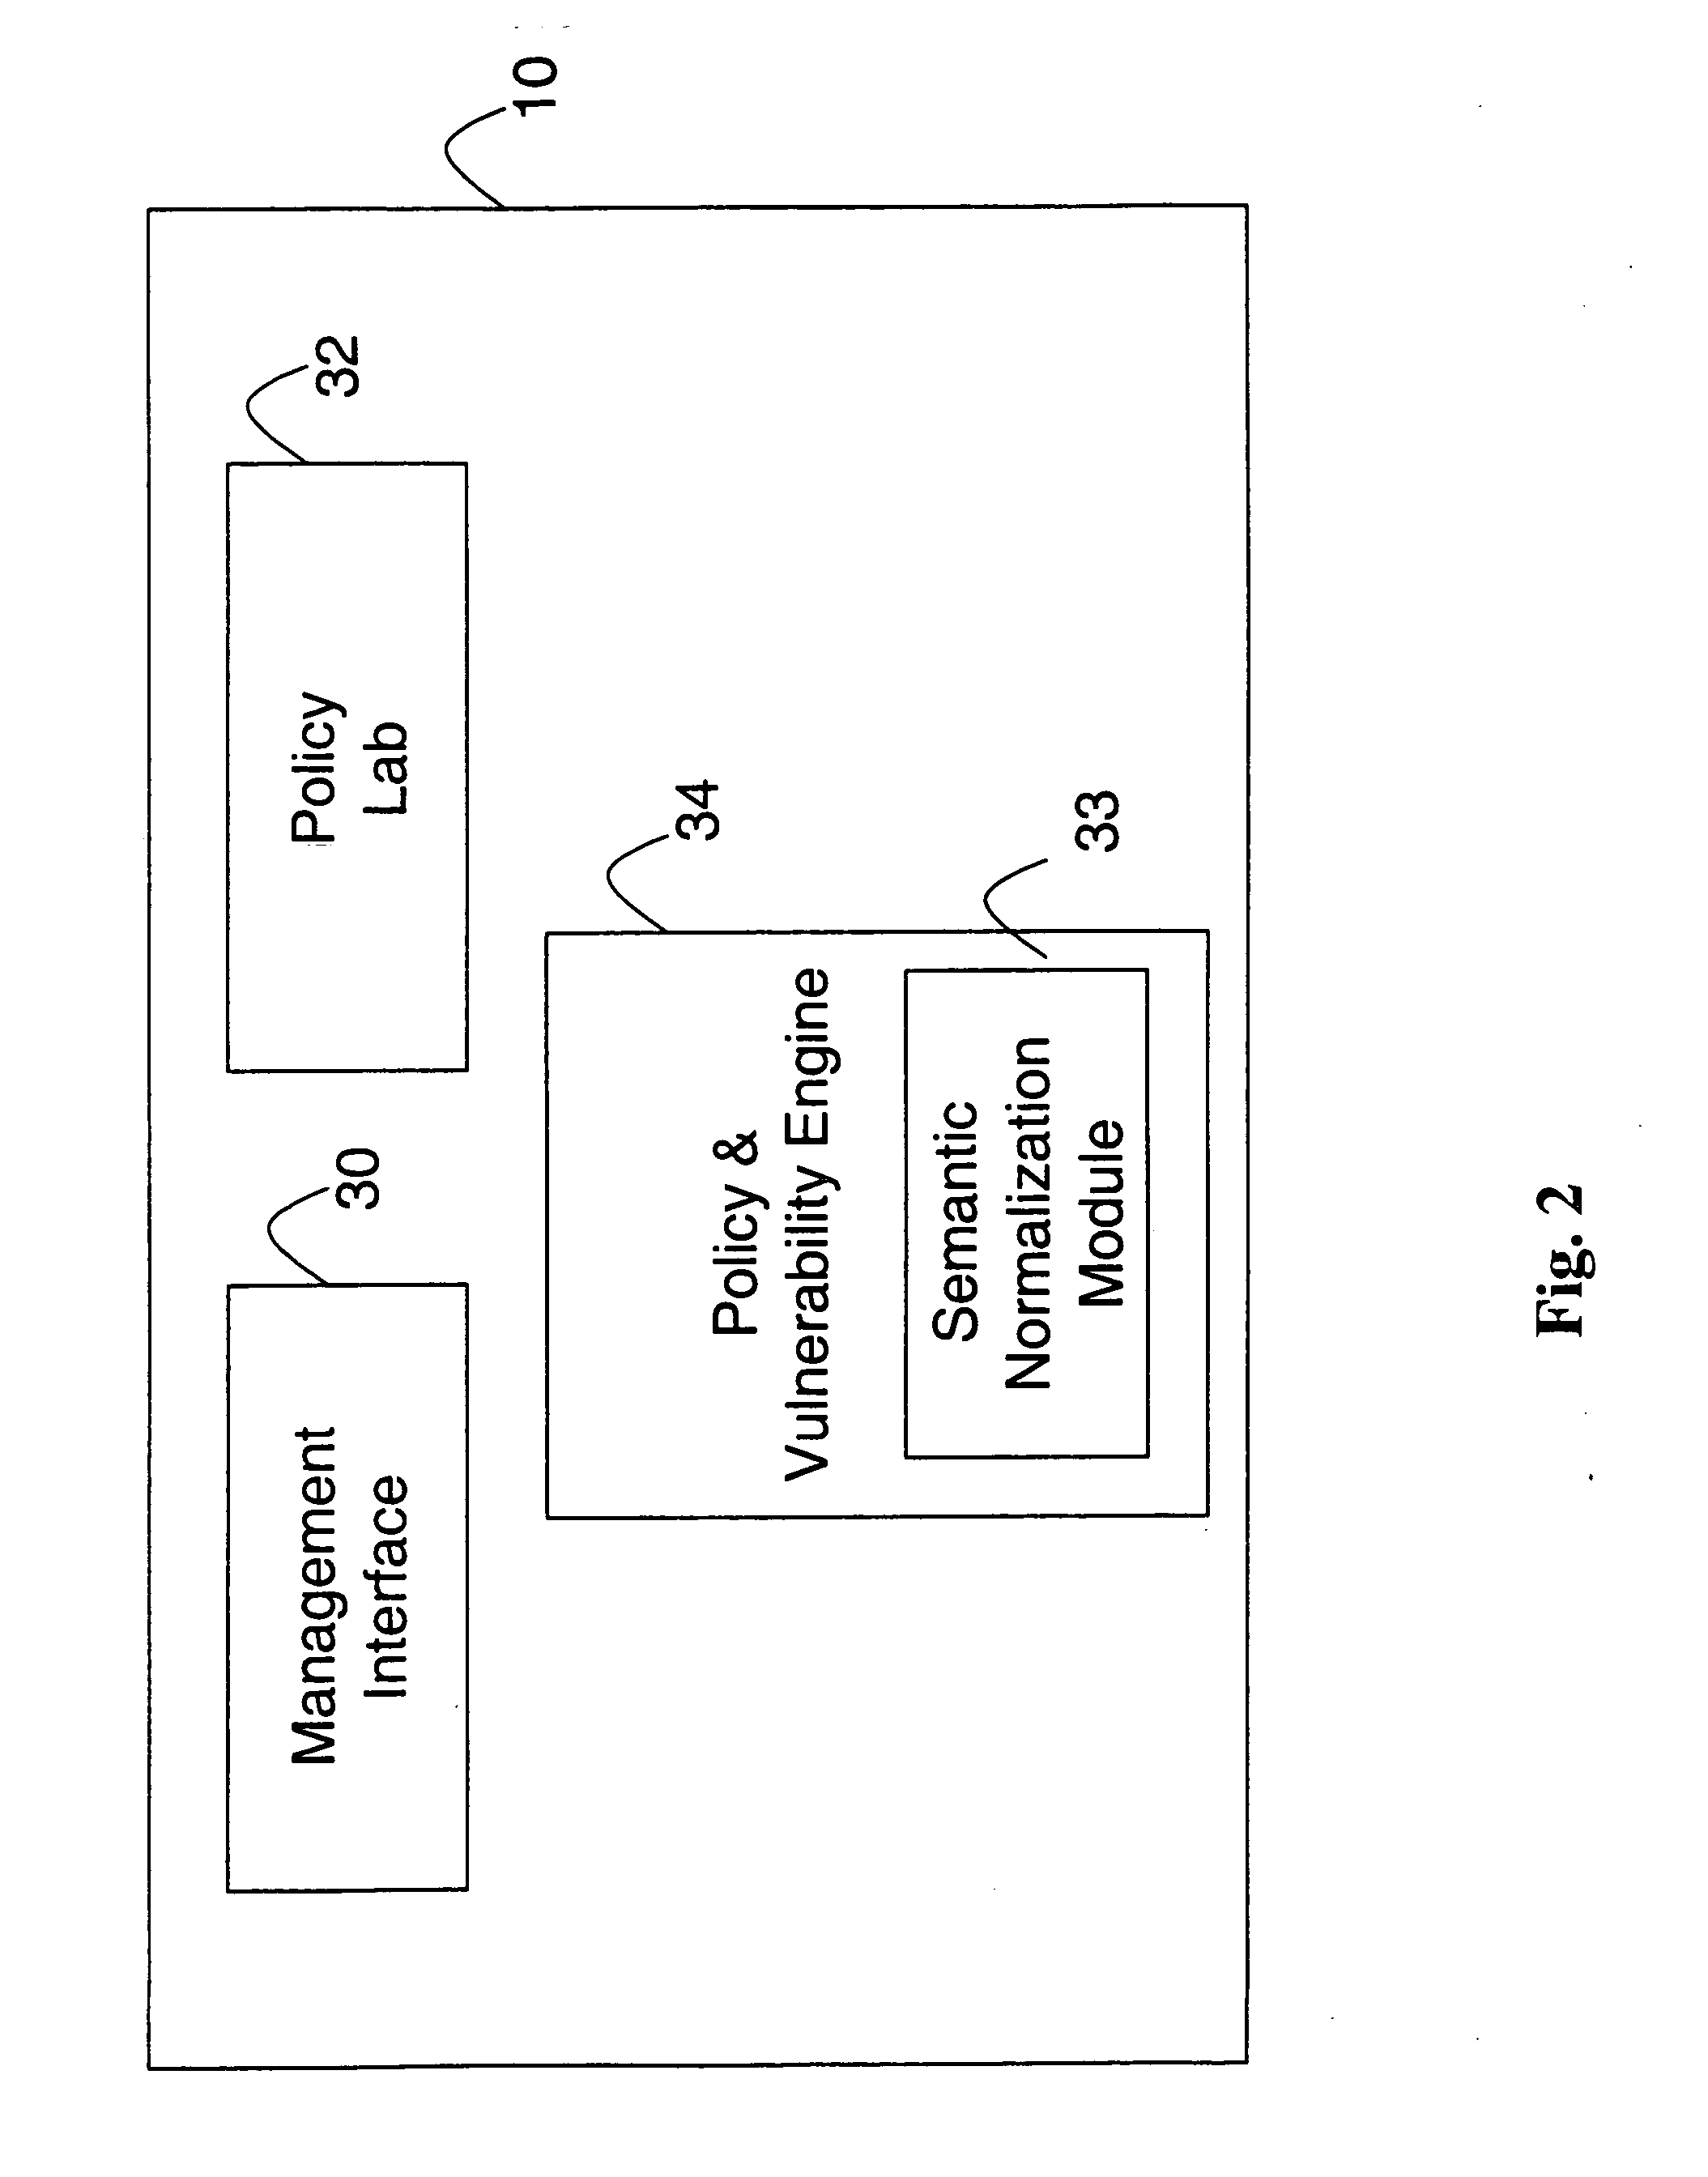 System and method for automated policy audit and remediation management